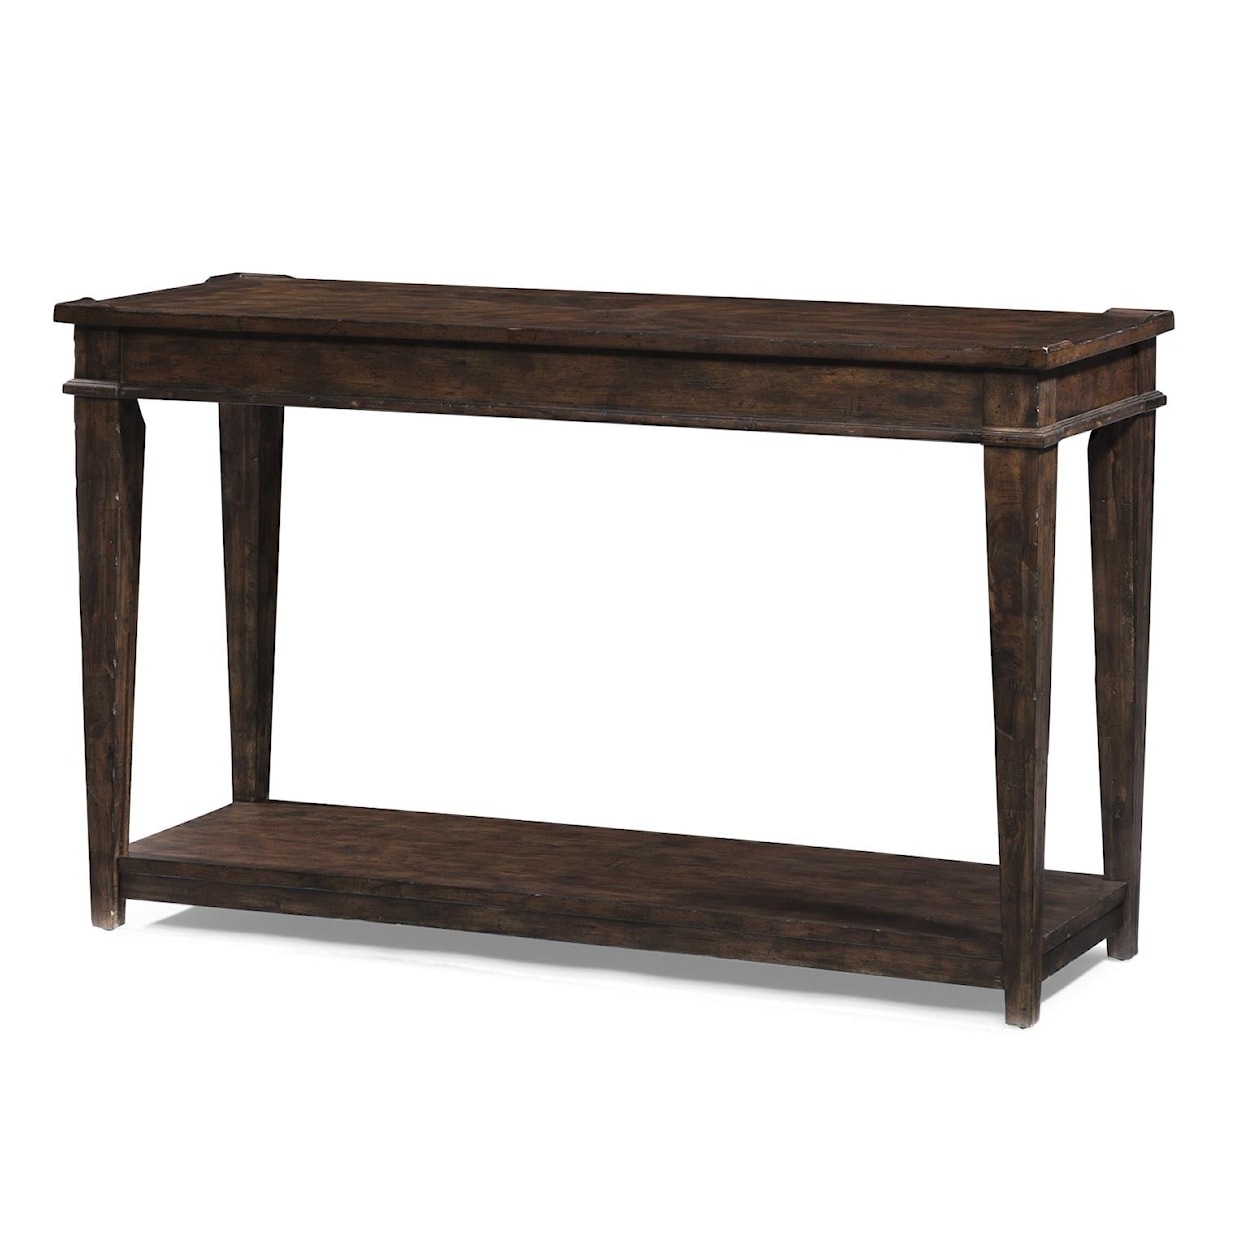 Trisha Yearwood Home Collection by Legacy Classic Trisha Yearwood Home Azalea Sofa Table